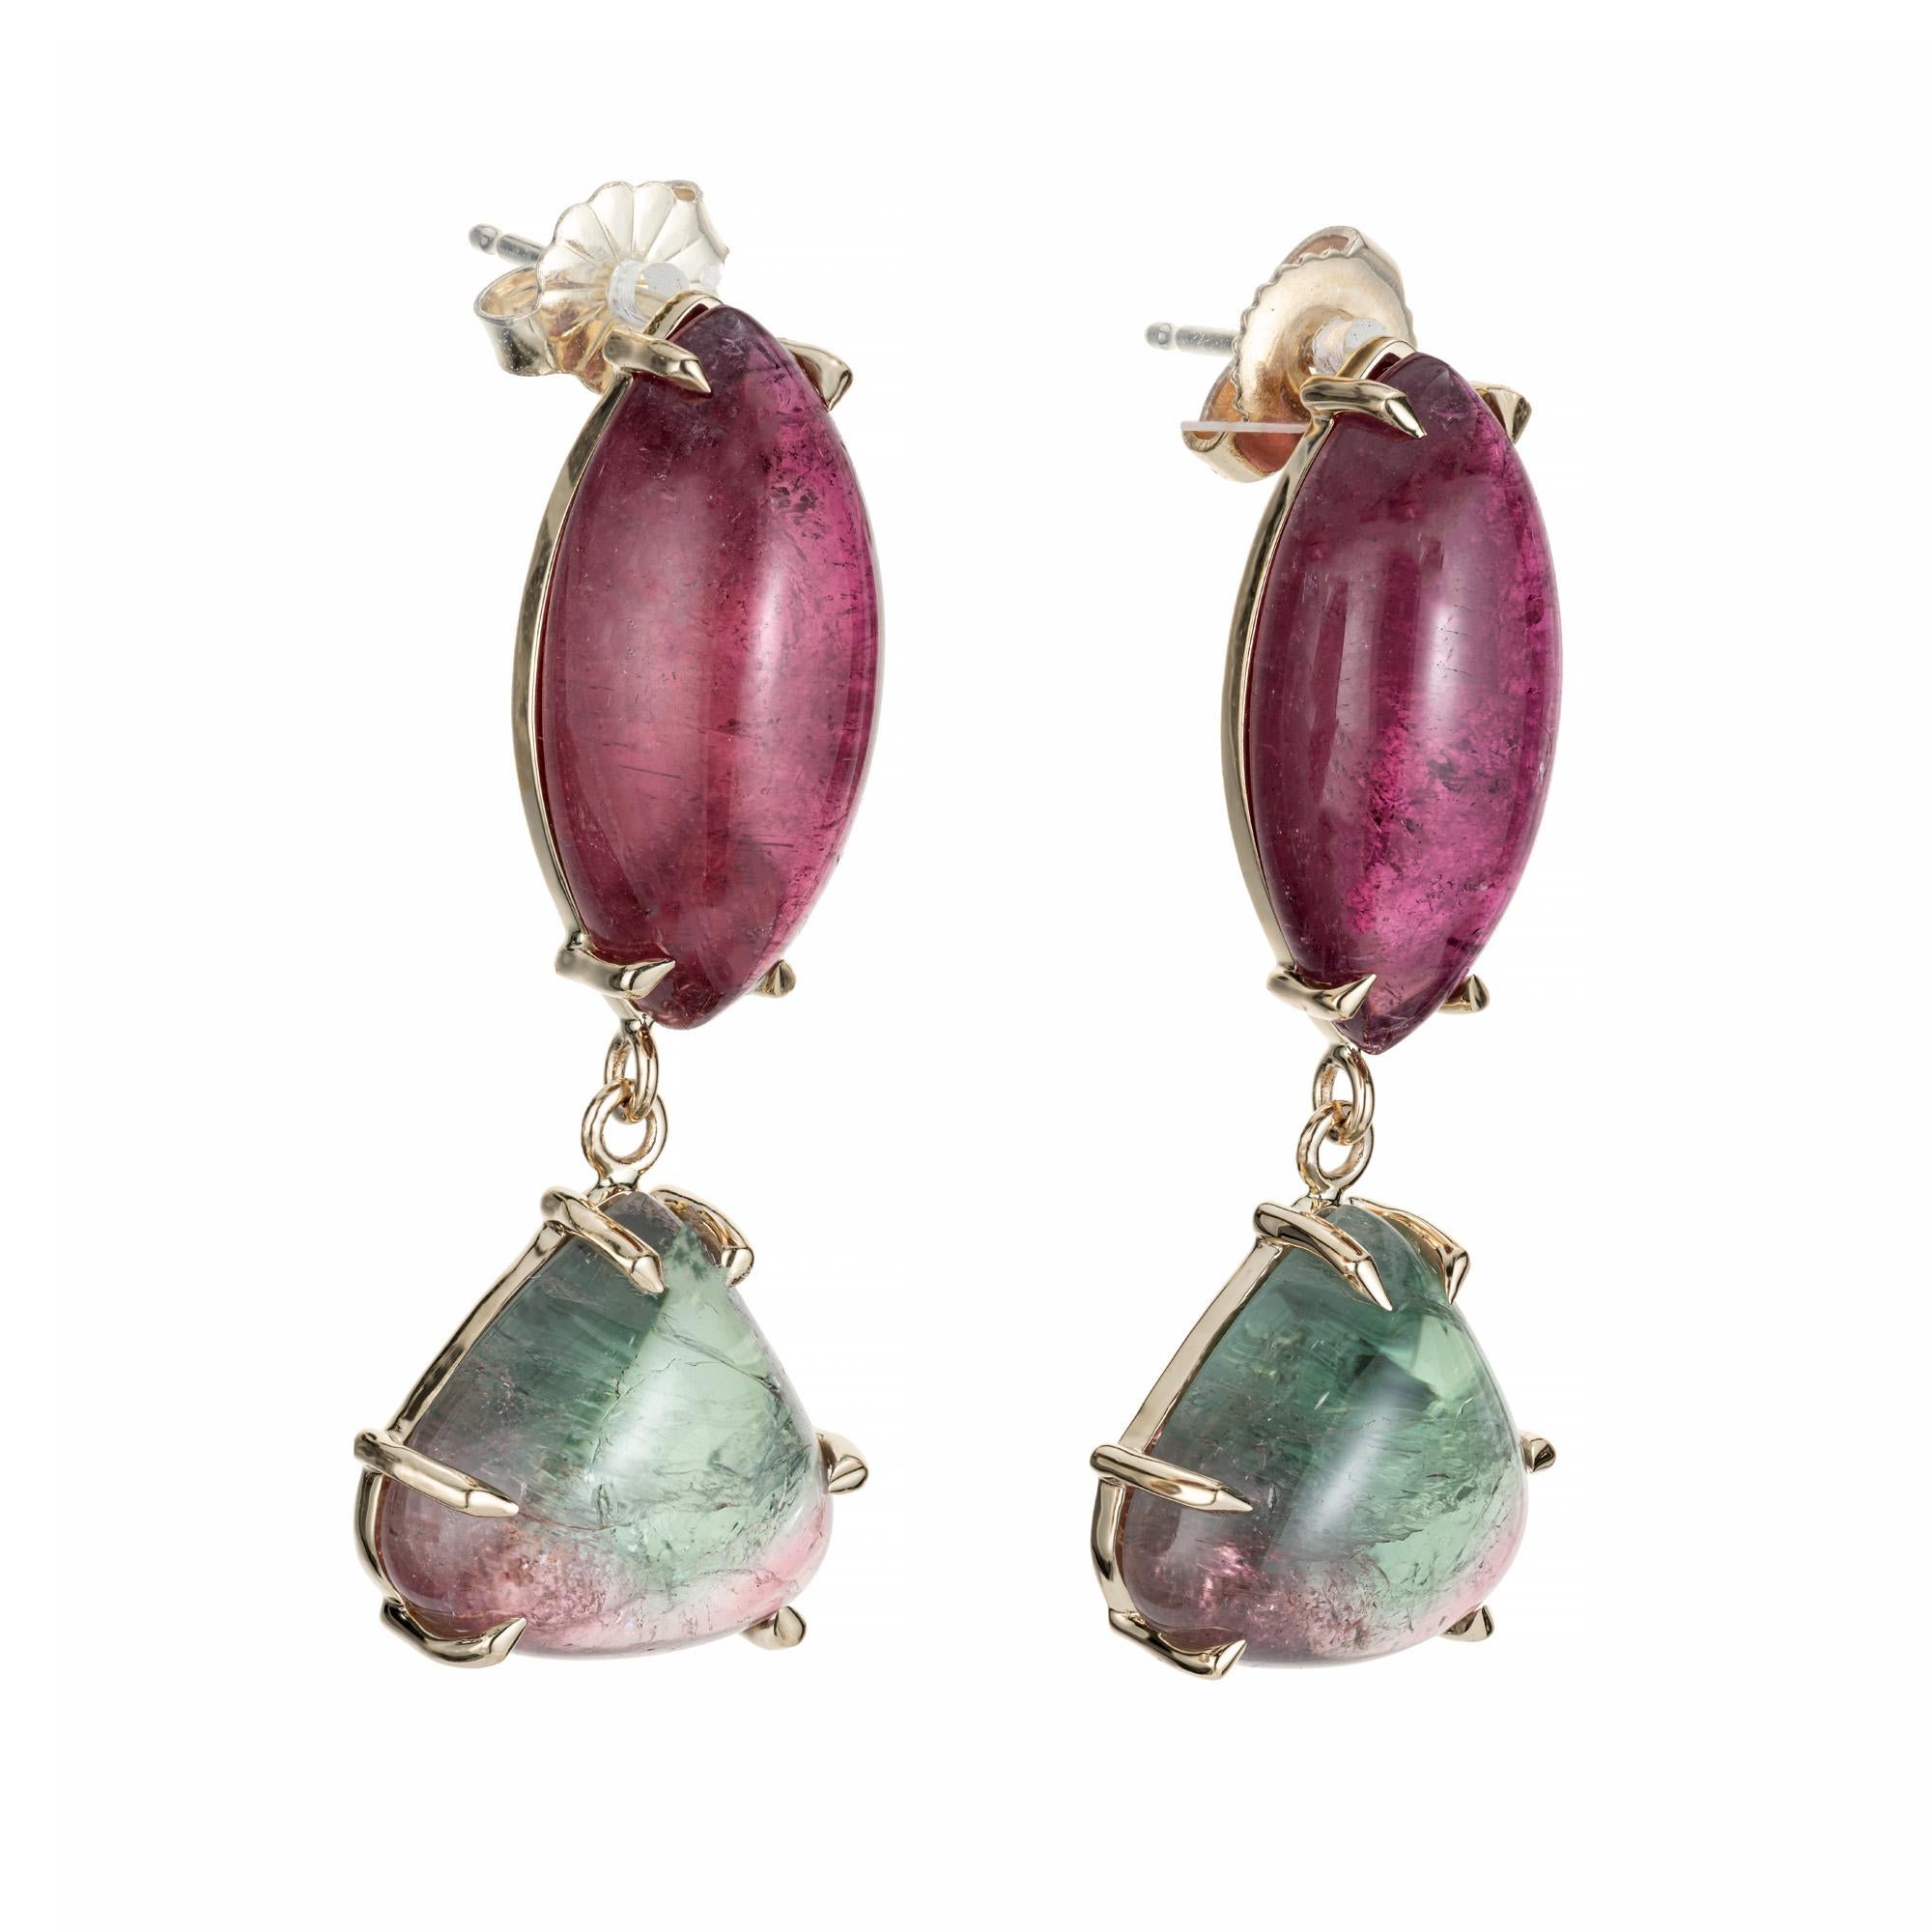 Tourmaline dangle earrings. 2 marquise shaped red/pink tourmalines with 2 triangle shaped watermelon tourmaline dangles set in 14k yellow gold settings. Designed and crafted in the Peter Suchy workshop

2 marquise shaped pinkish red tourmaline,